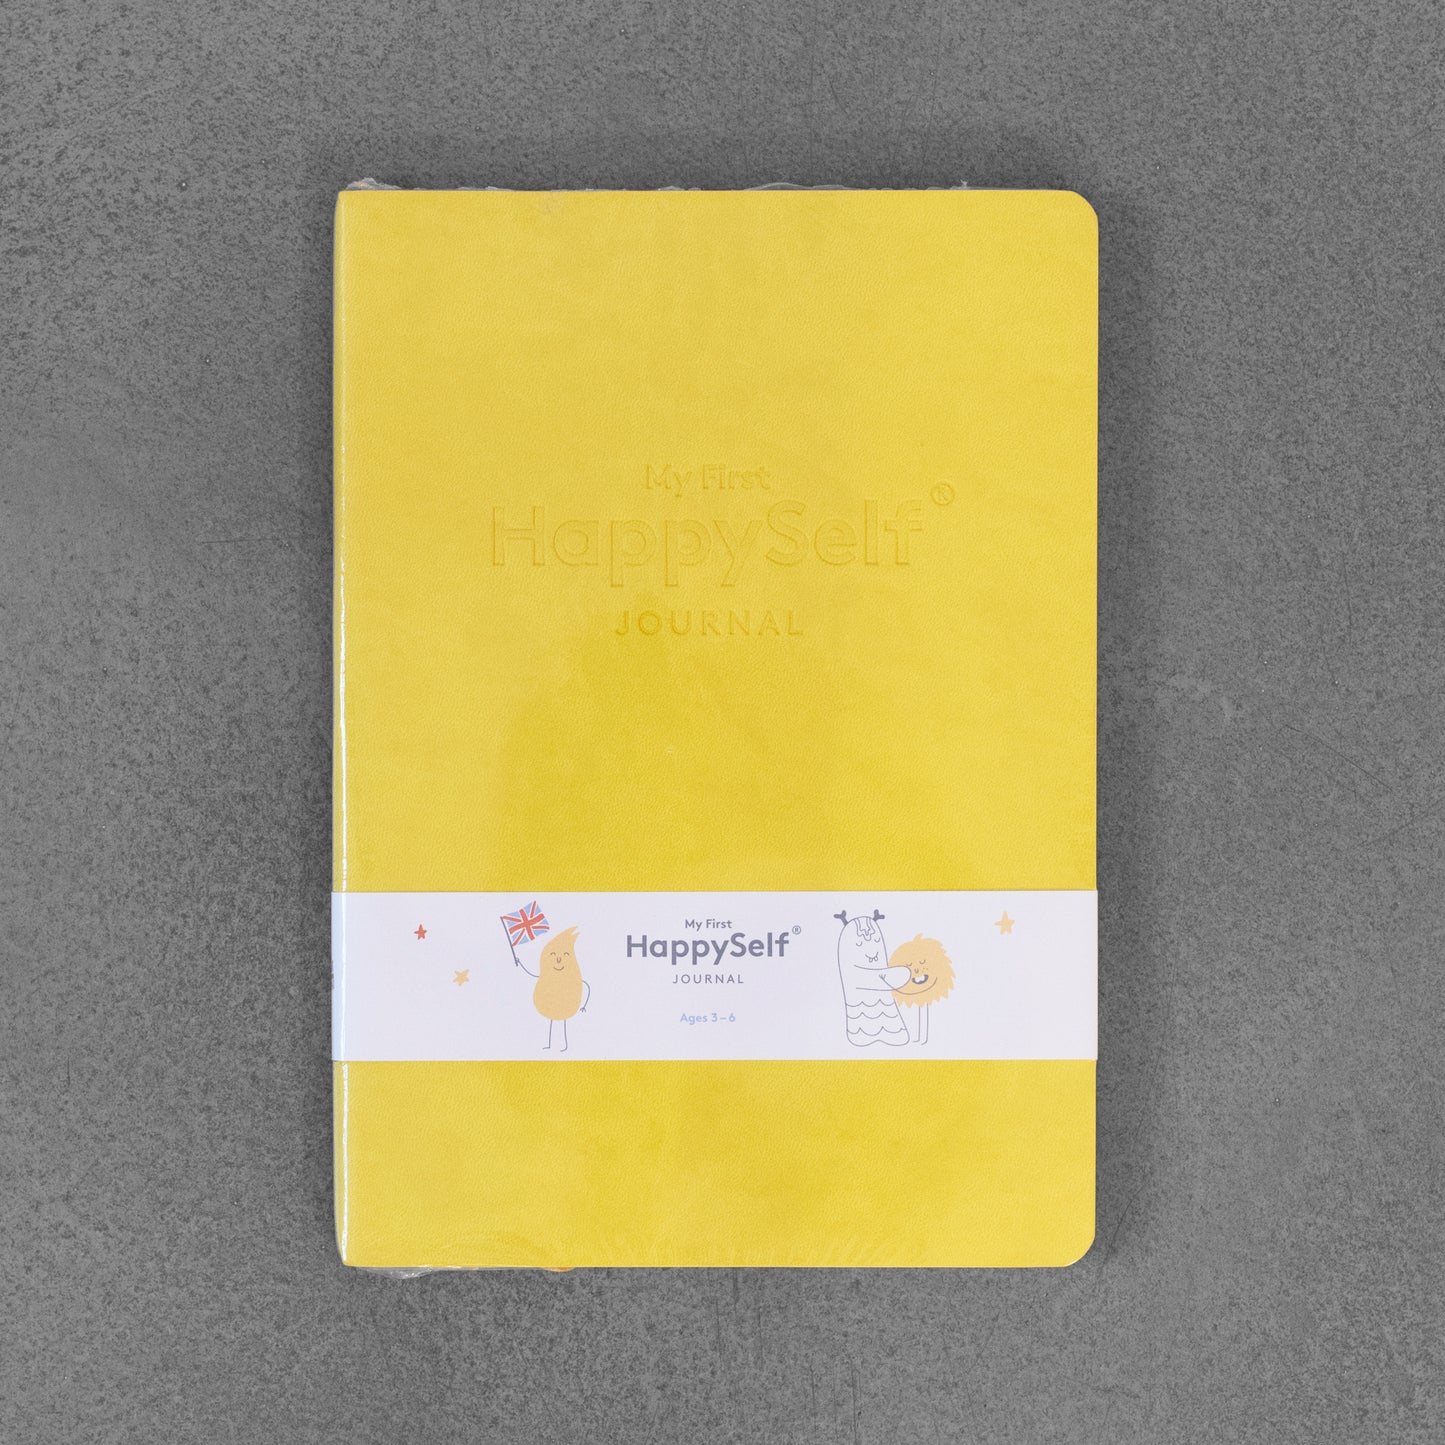 The HappySelf Journal - My First Journal